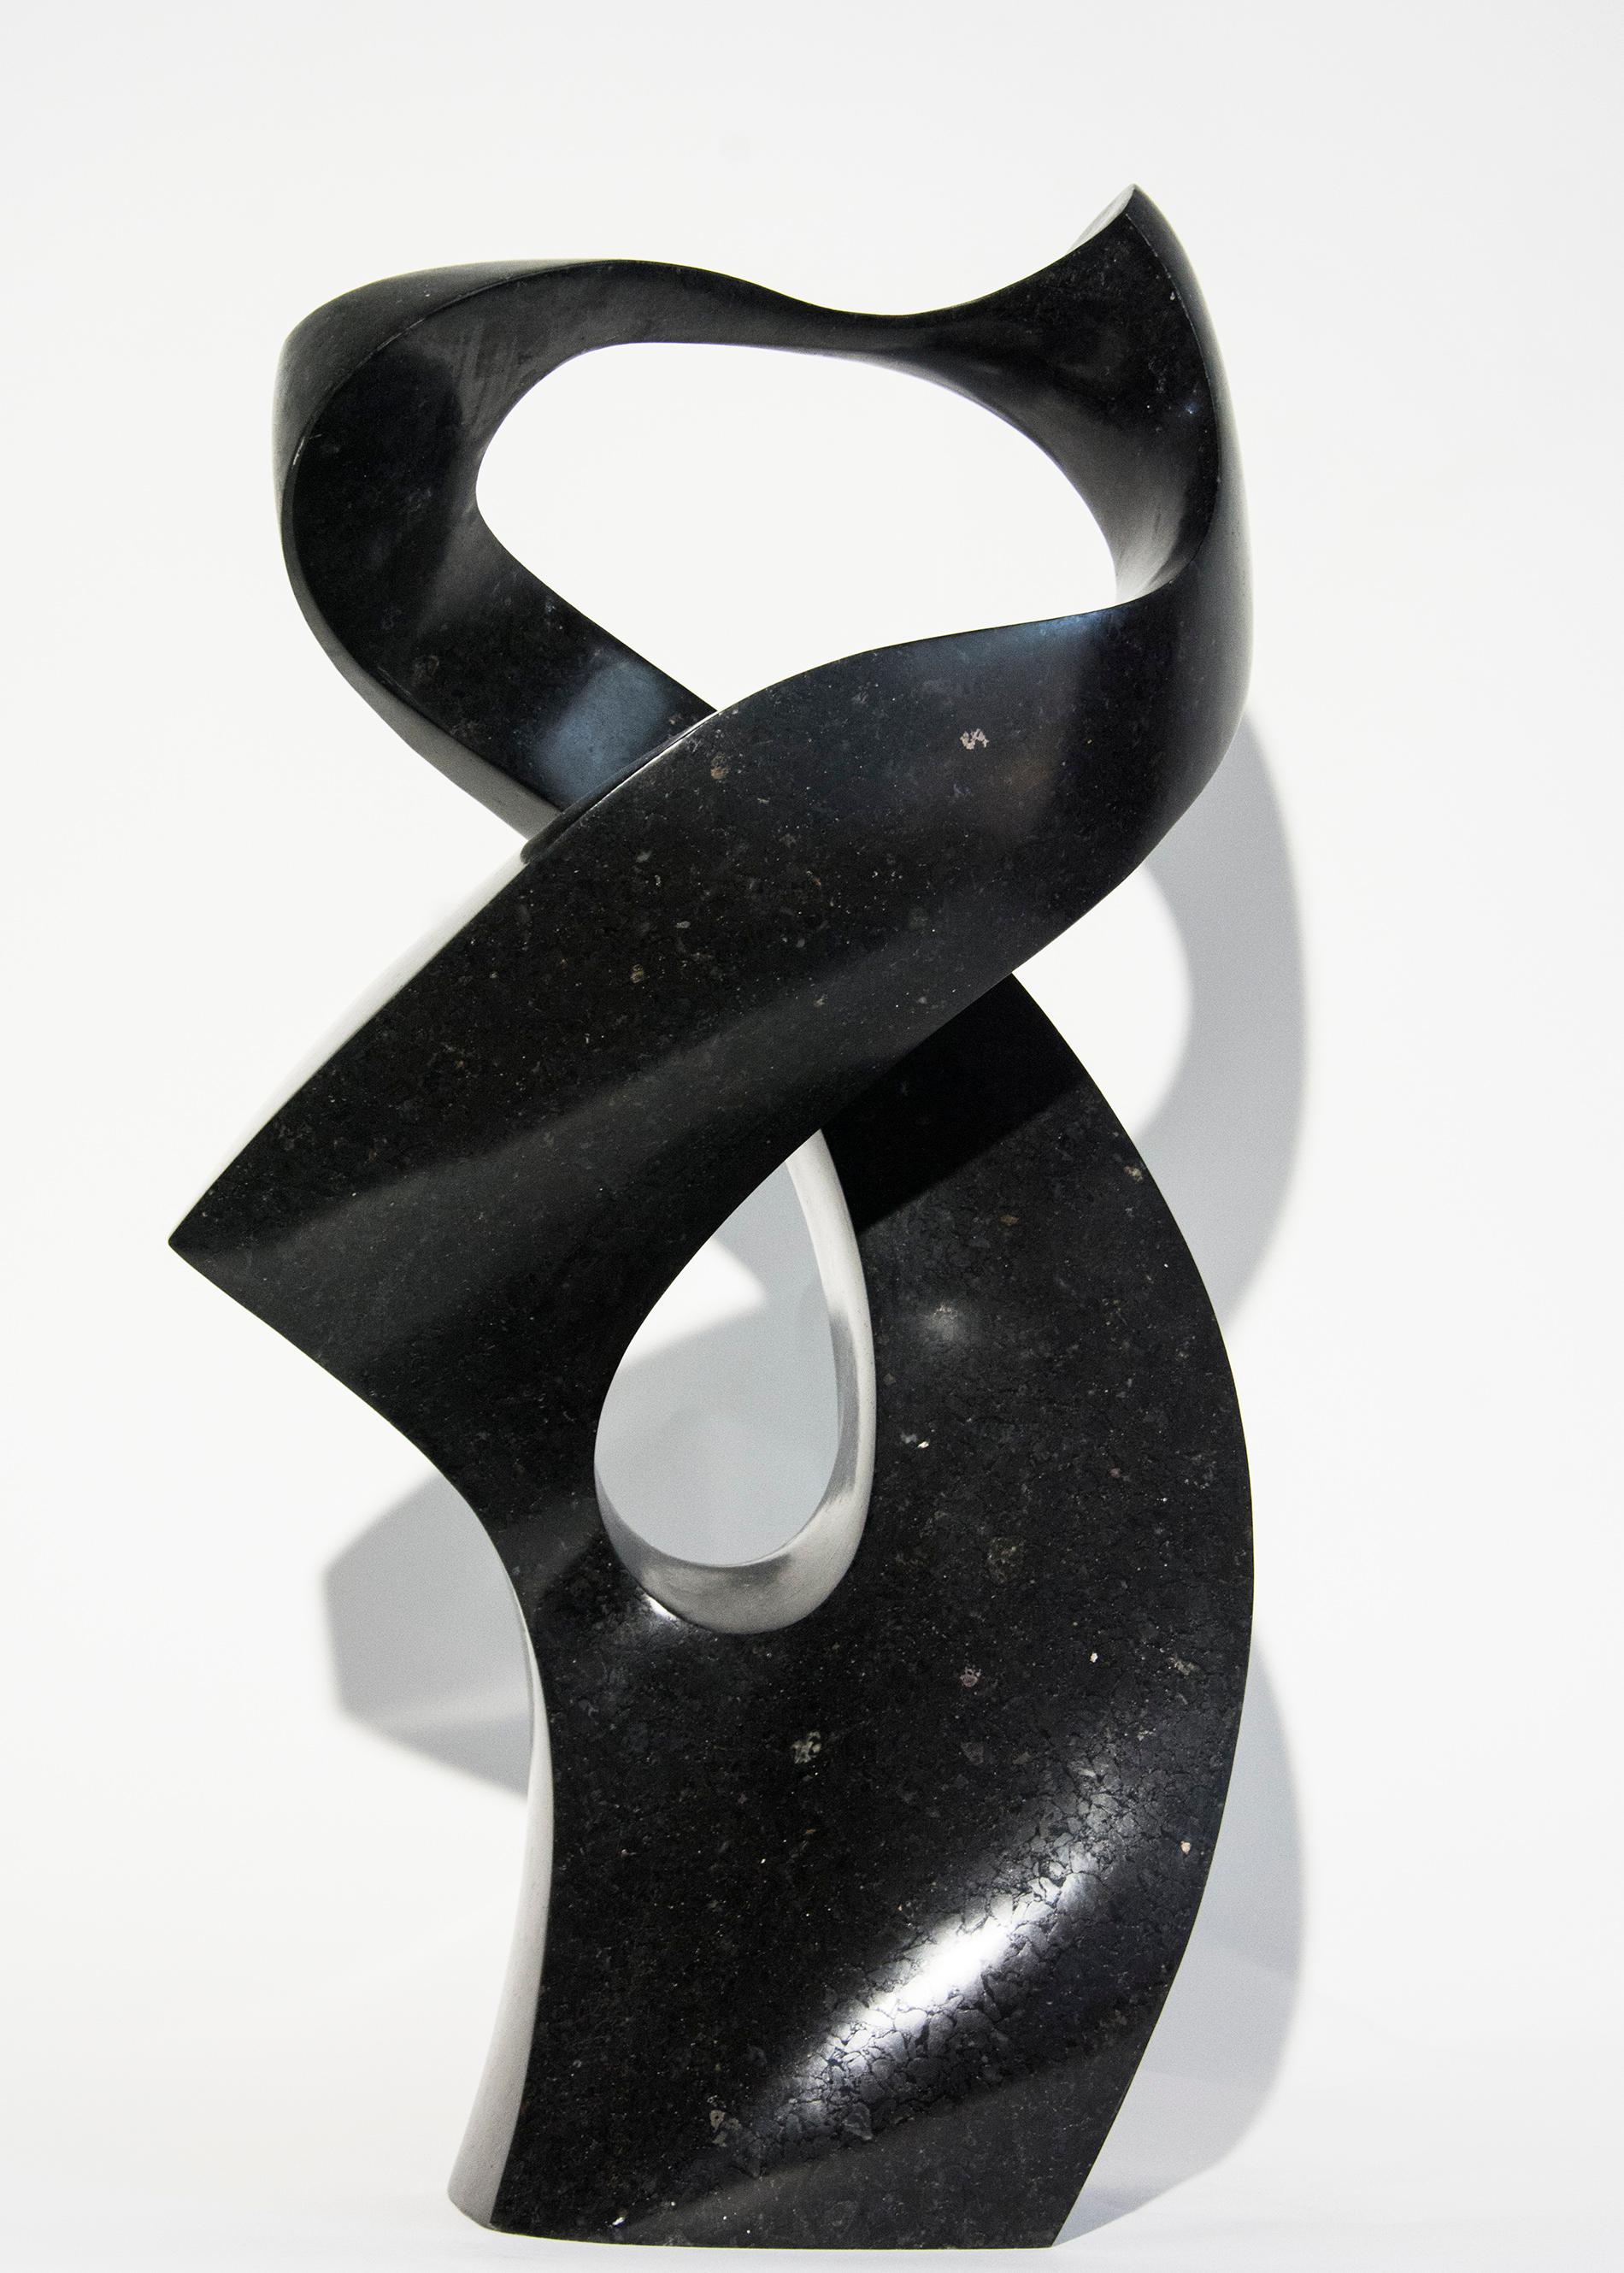 Embrace 4/50 - dark, smooth, polished, abstract, black granite sculpture